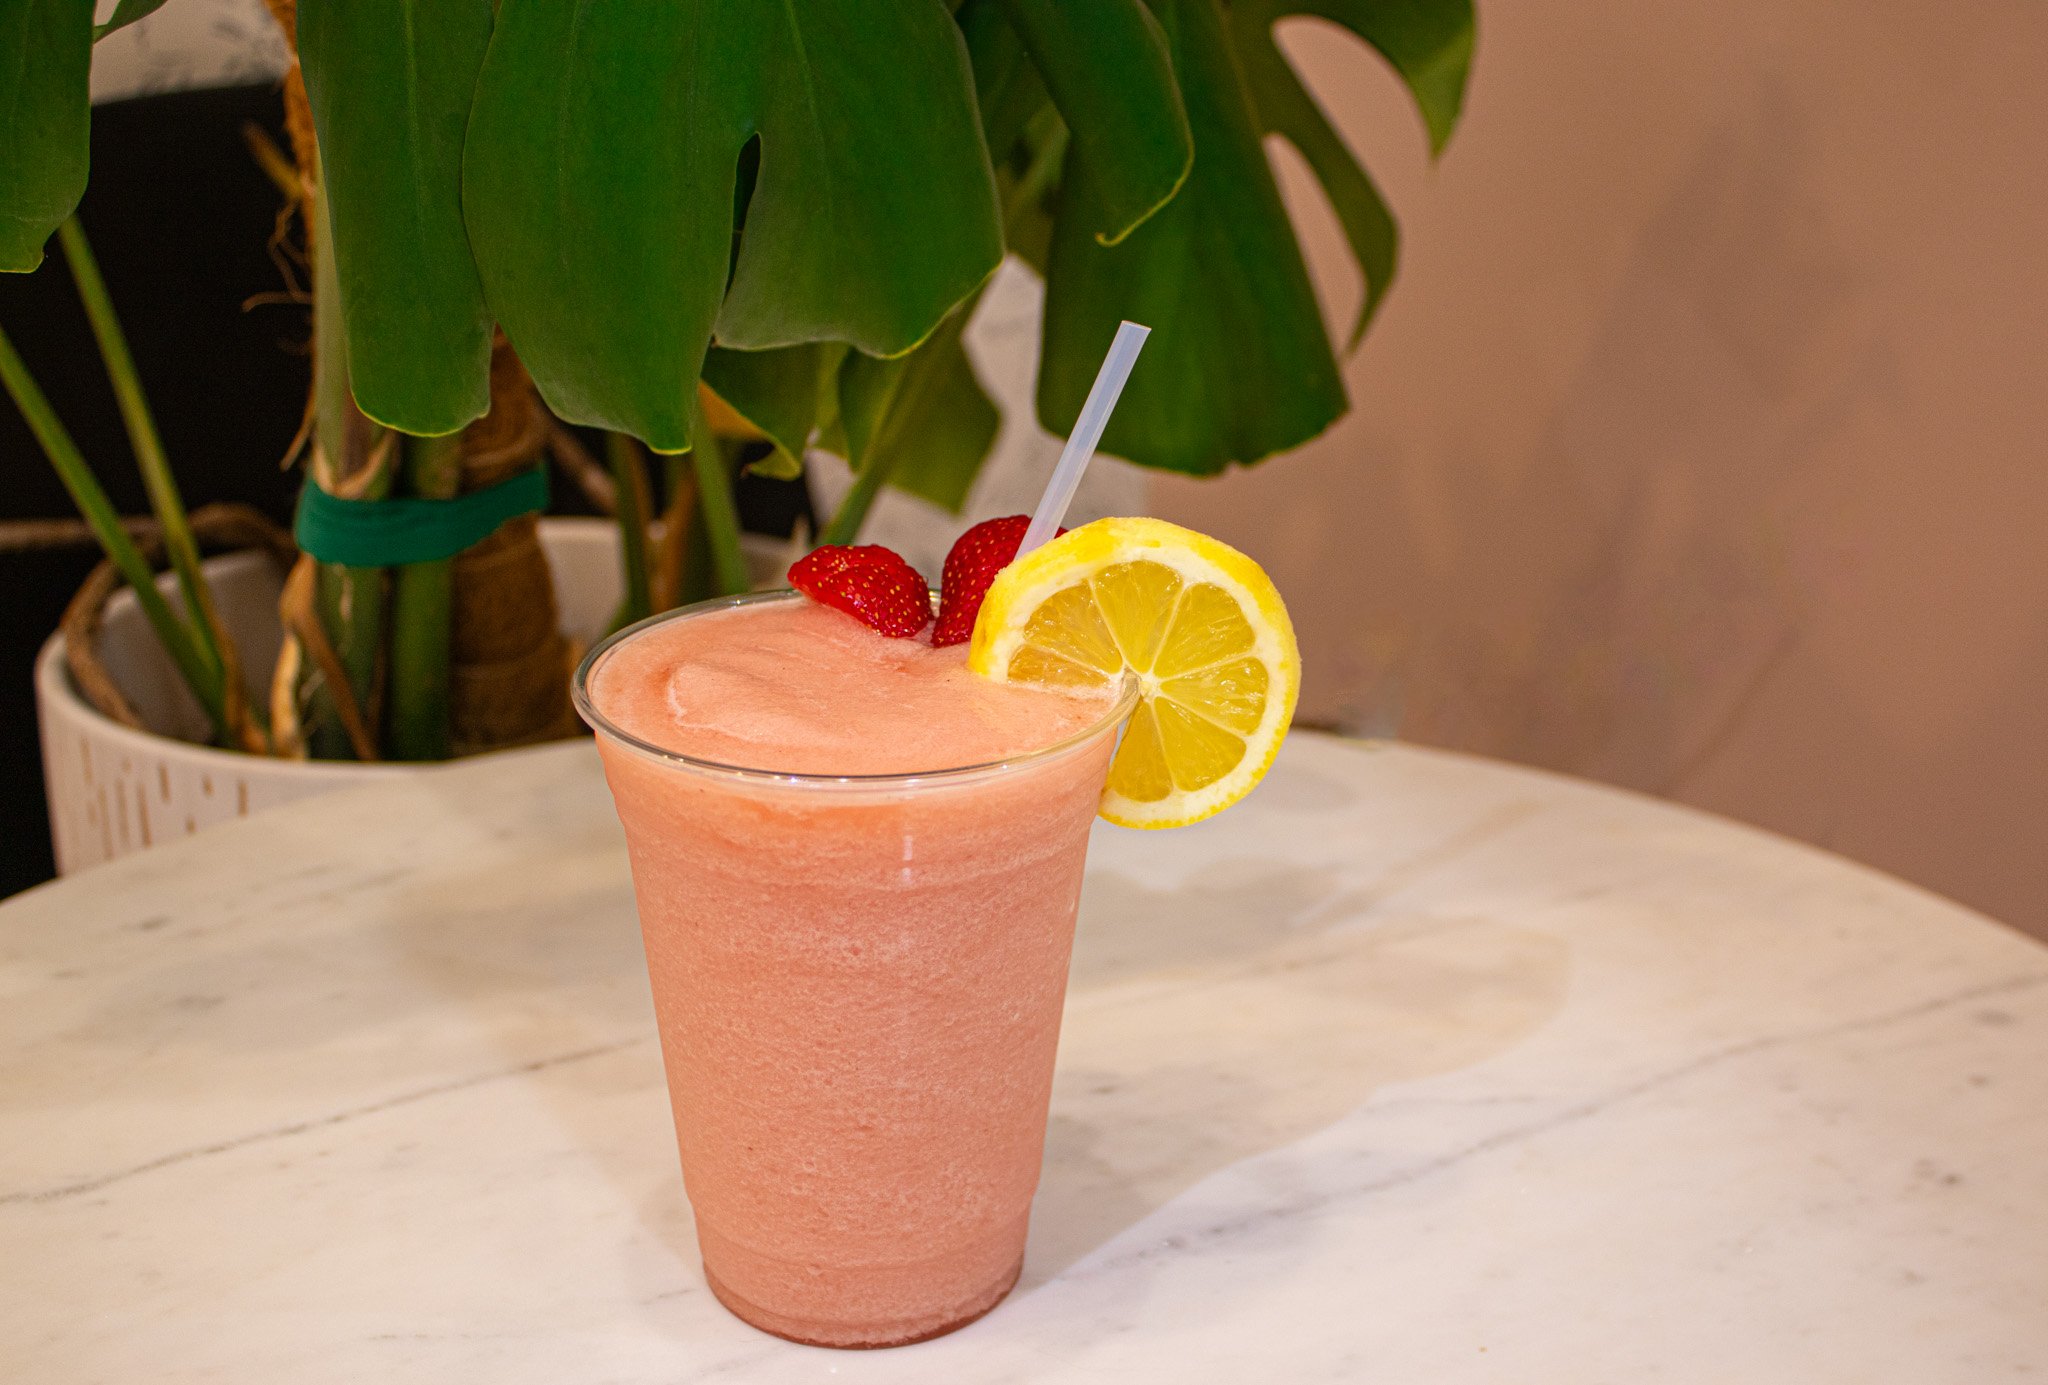 There might be some storms today, but it is nice and warm! Lets celebrate what we can with frozen drinks. There is something for coffee lovers, tea lovers, and drink lovers. 🍓
.
Order online for pickup or delivery: https://whiskandarrow.com/order
.
